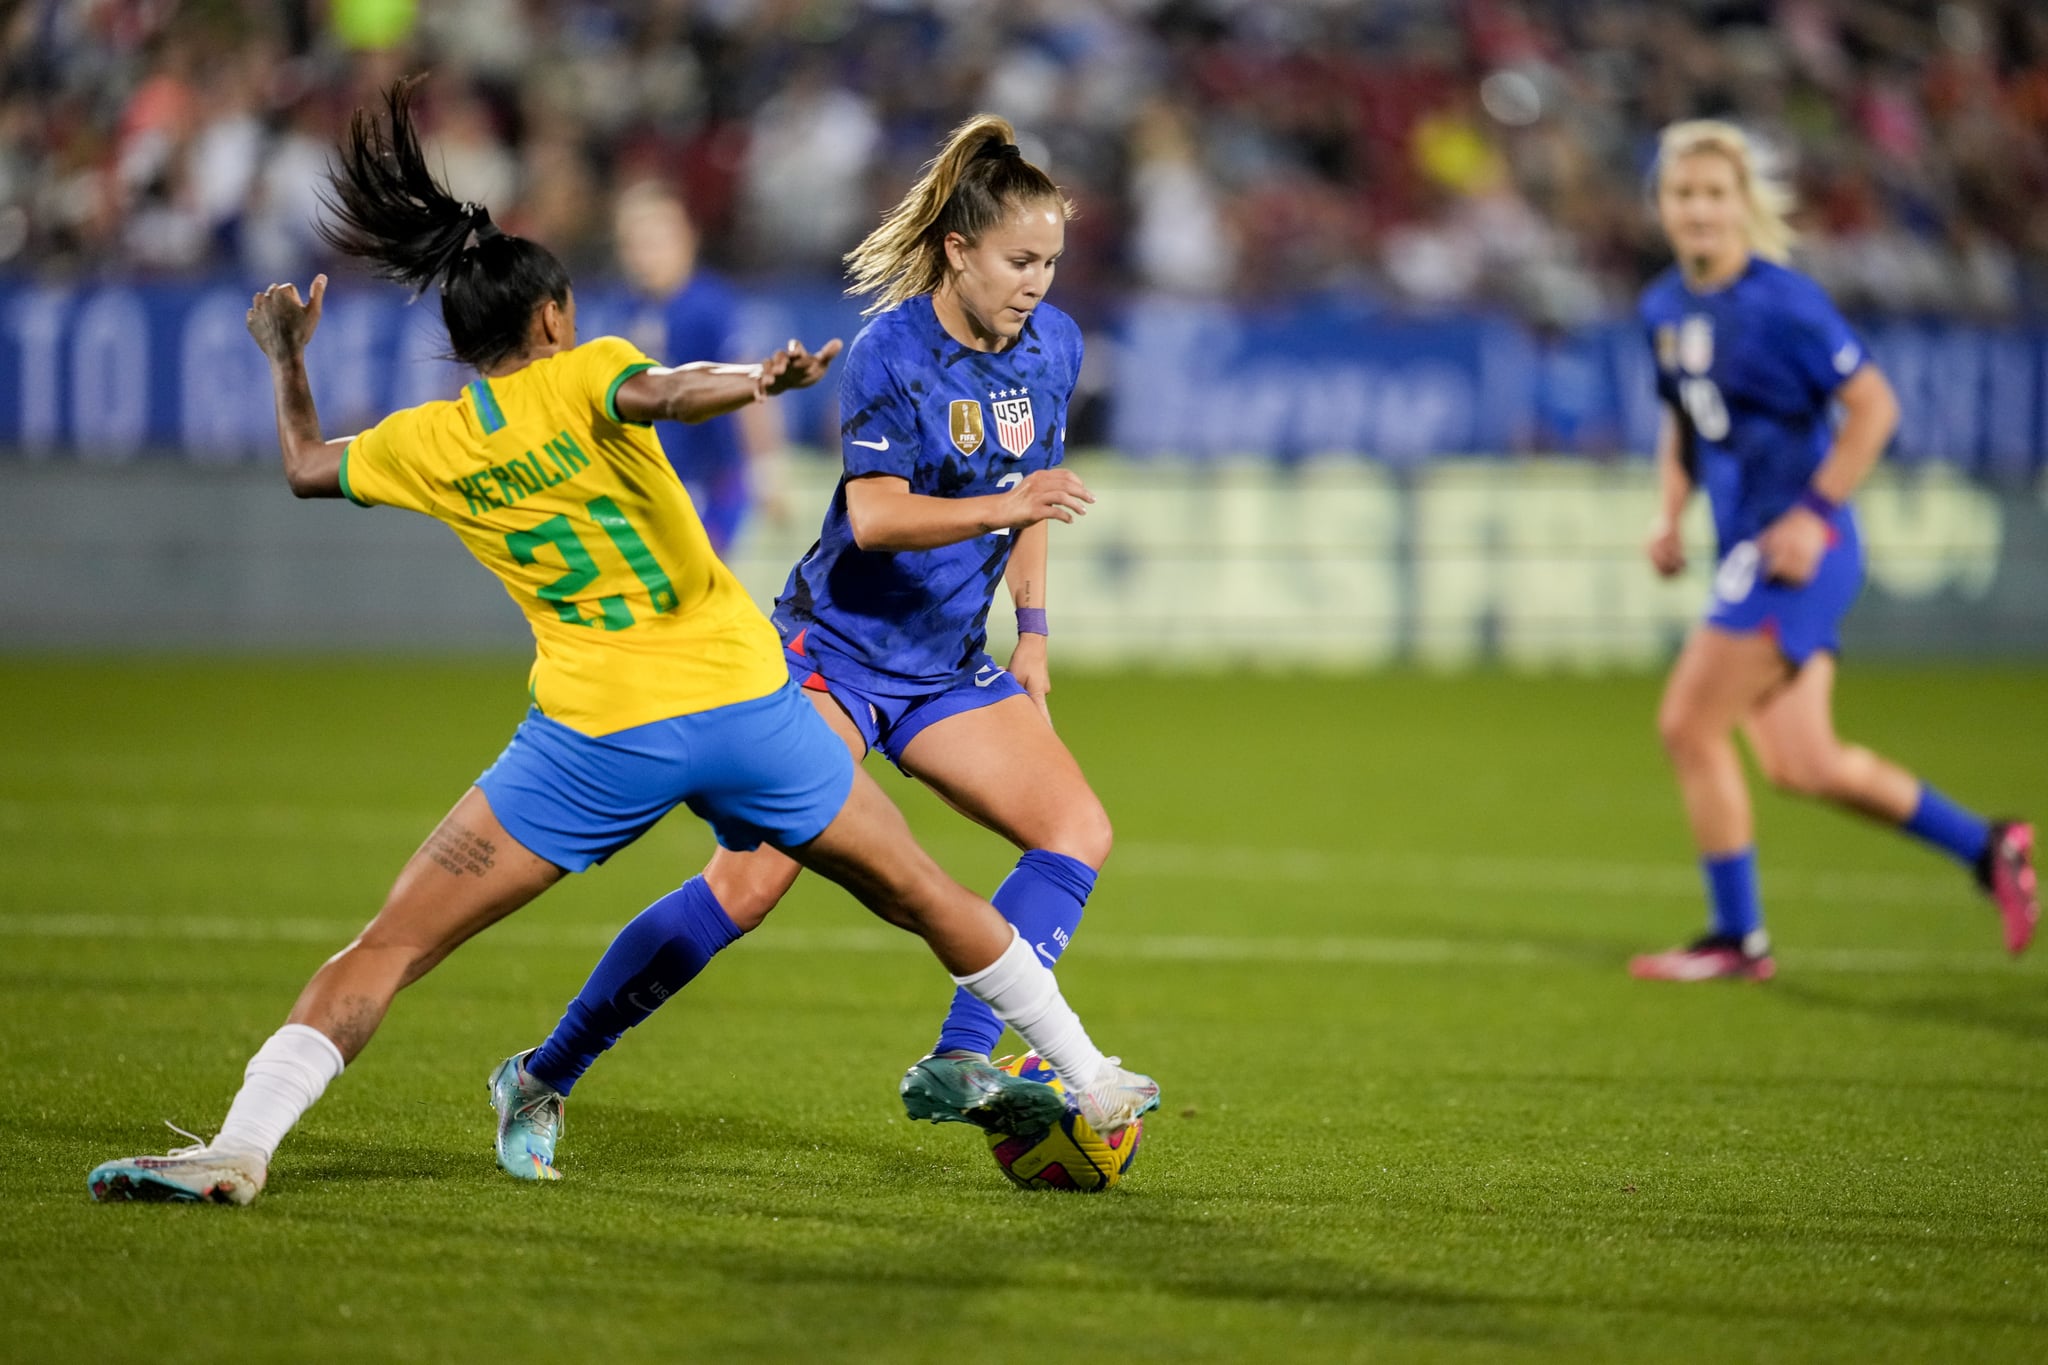 FRISCO, TX - FEBRUARY 22: Ashley Sanchez #2 of the USA races towards the goal during the SheBelieves Cup game between Brazil and USWNT at Toyota Stadium on February 22, 2023 in Frisco, Texas. (Photo by Brad Smith/ISI Photos/Getty Images)